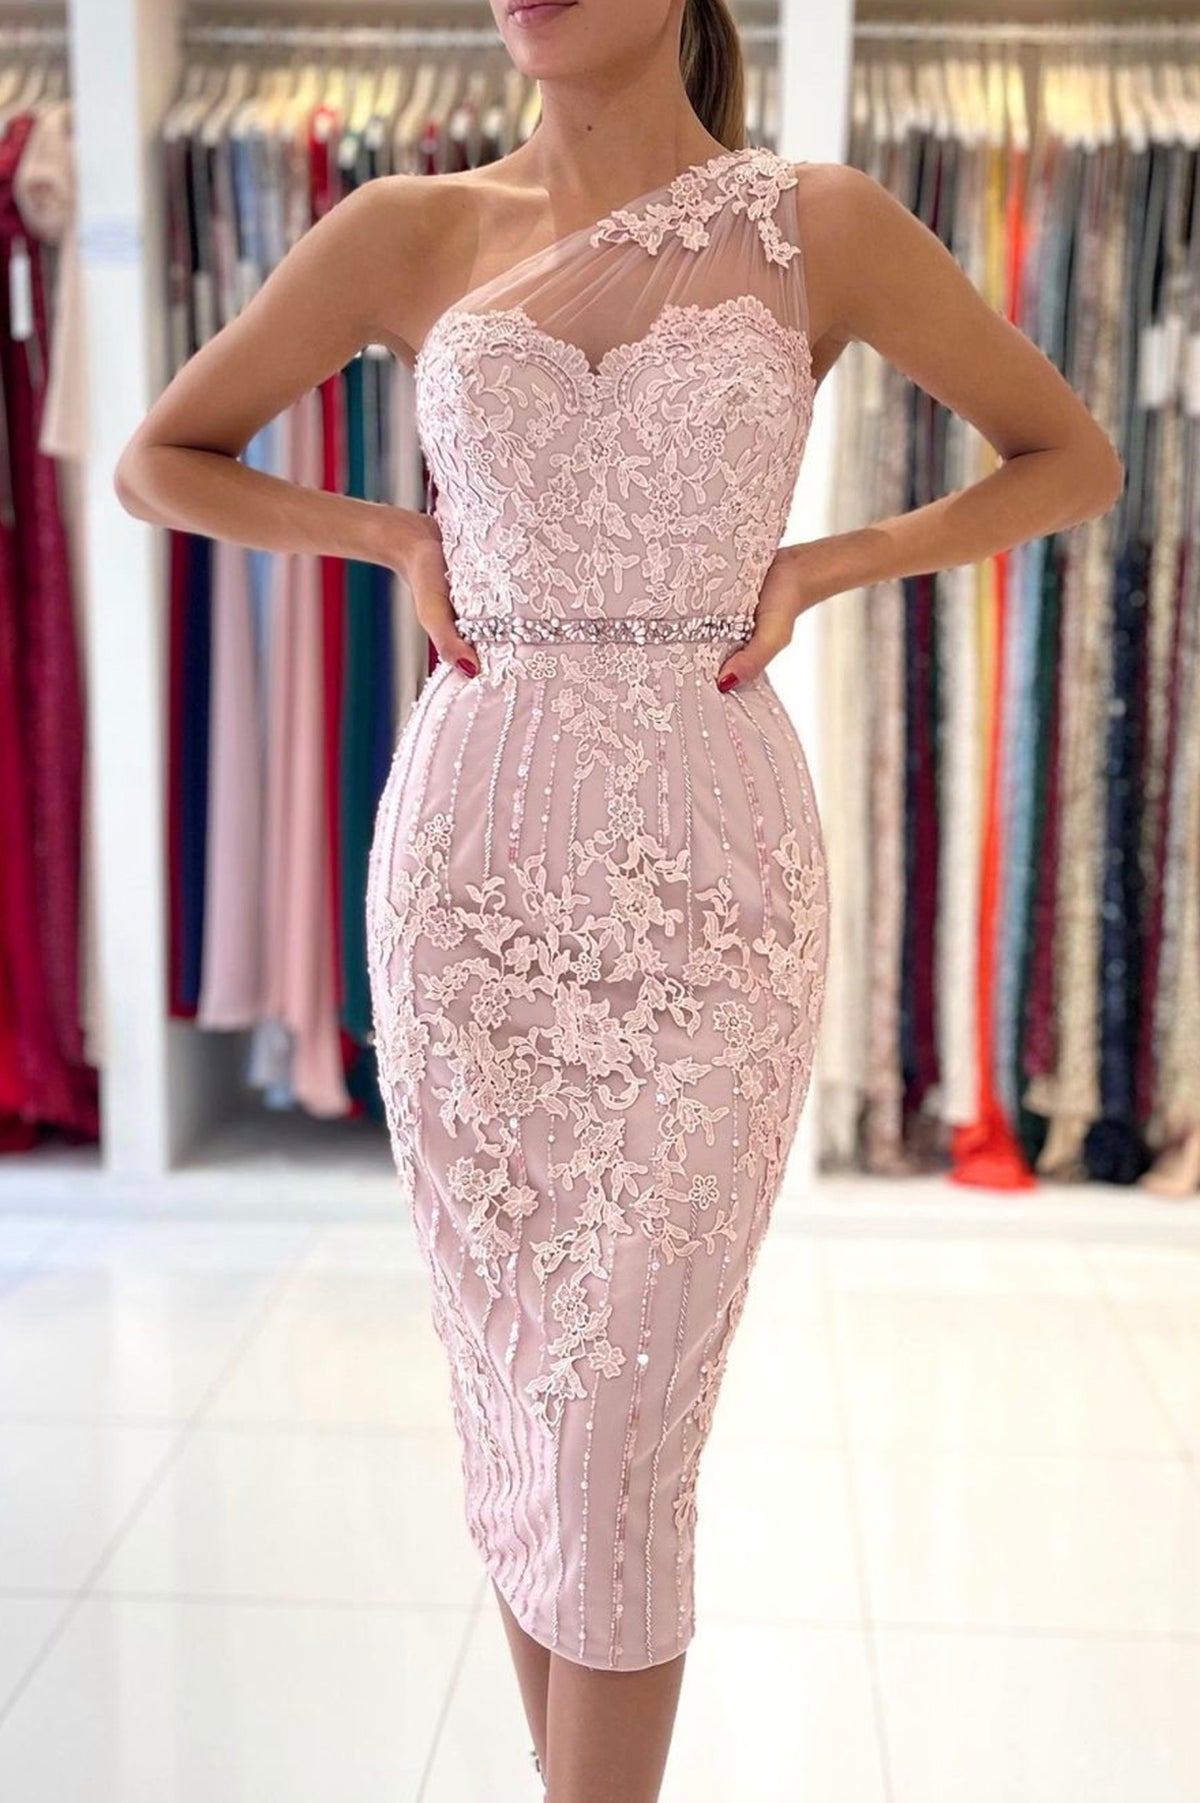 Pink Lace One Shoulder Prom Dress, Cute Homecoming Party Dress